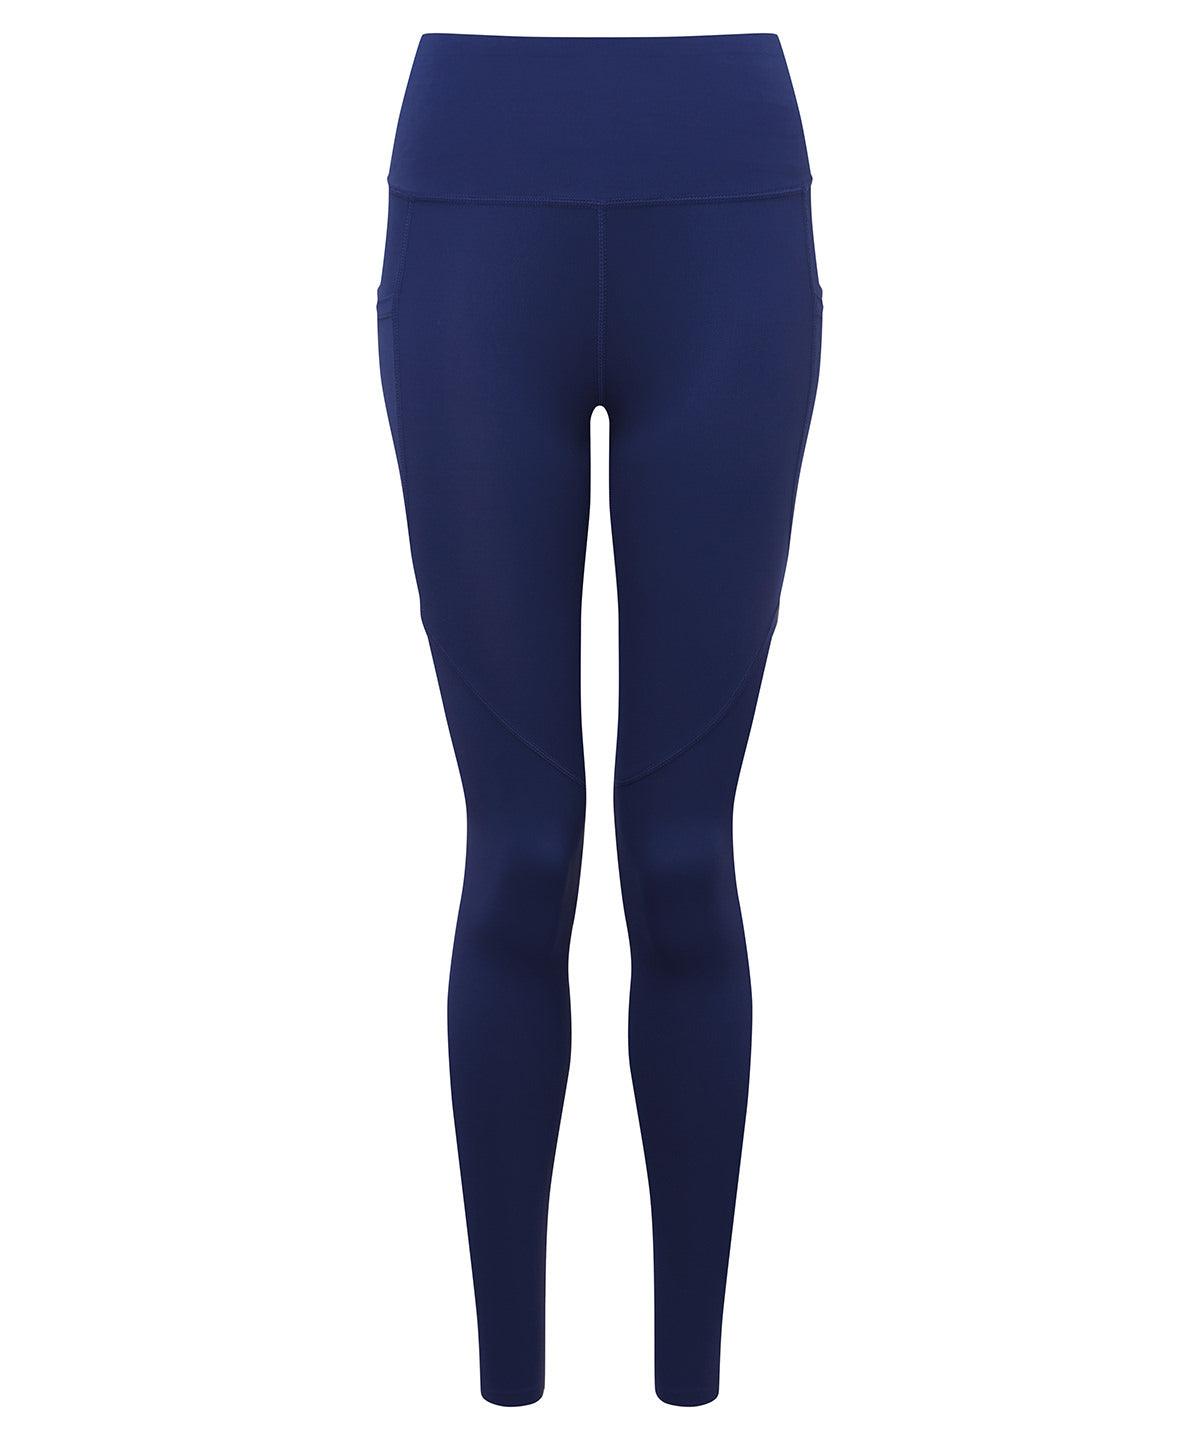 Navy - Women's TriDri® hourglass leggings Leggings TriDri® Activewear & Performance, Back to the Gym, Exclusives, Fashion Leggings, Leggings, New Colours For 2022, New For 2021, New Styles For 2021, Outdoor Sports, Plus Sizes, Rebrandable, Sports & Leisure, Trousers & Shorts Schoolwear Centres